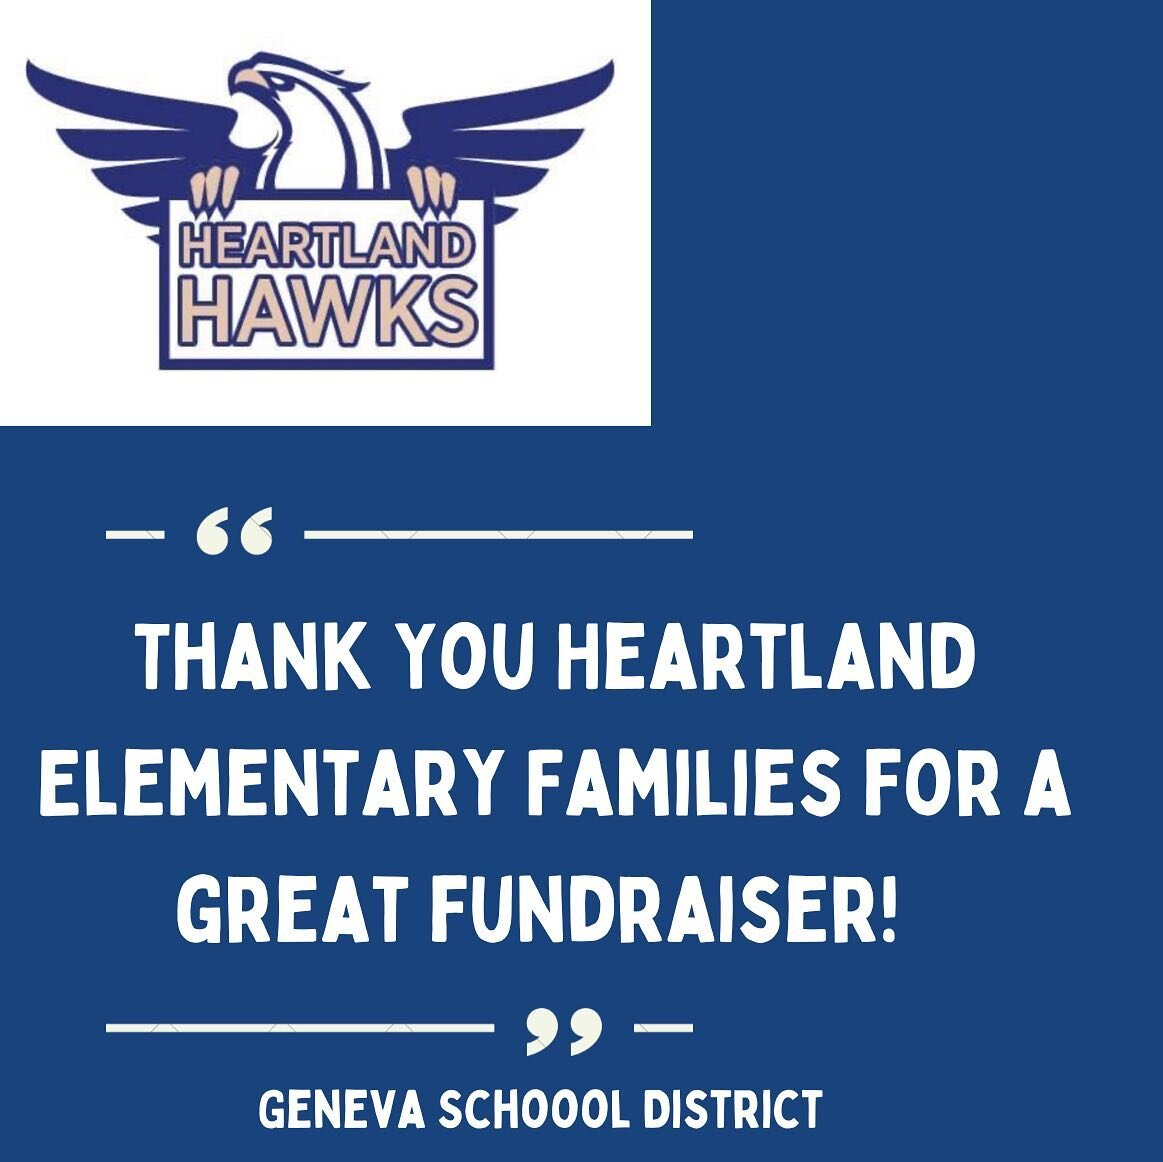 Thank You Heartland Elementary of Geneva&hellip;. for a great fundraiser yesterday. We love to feed your families and give back to the school!!